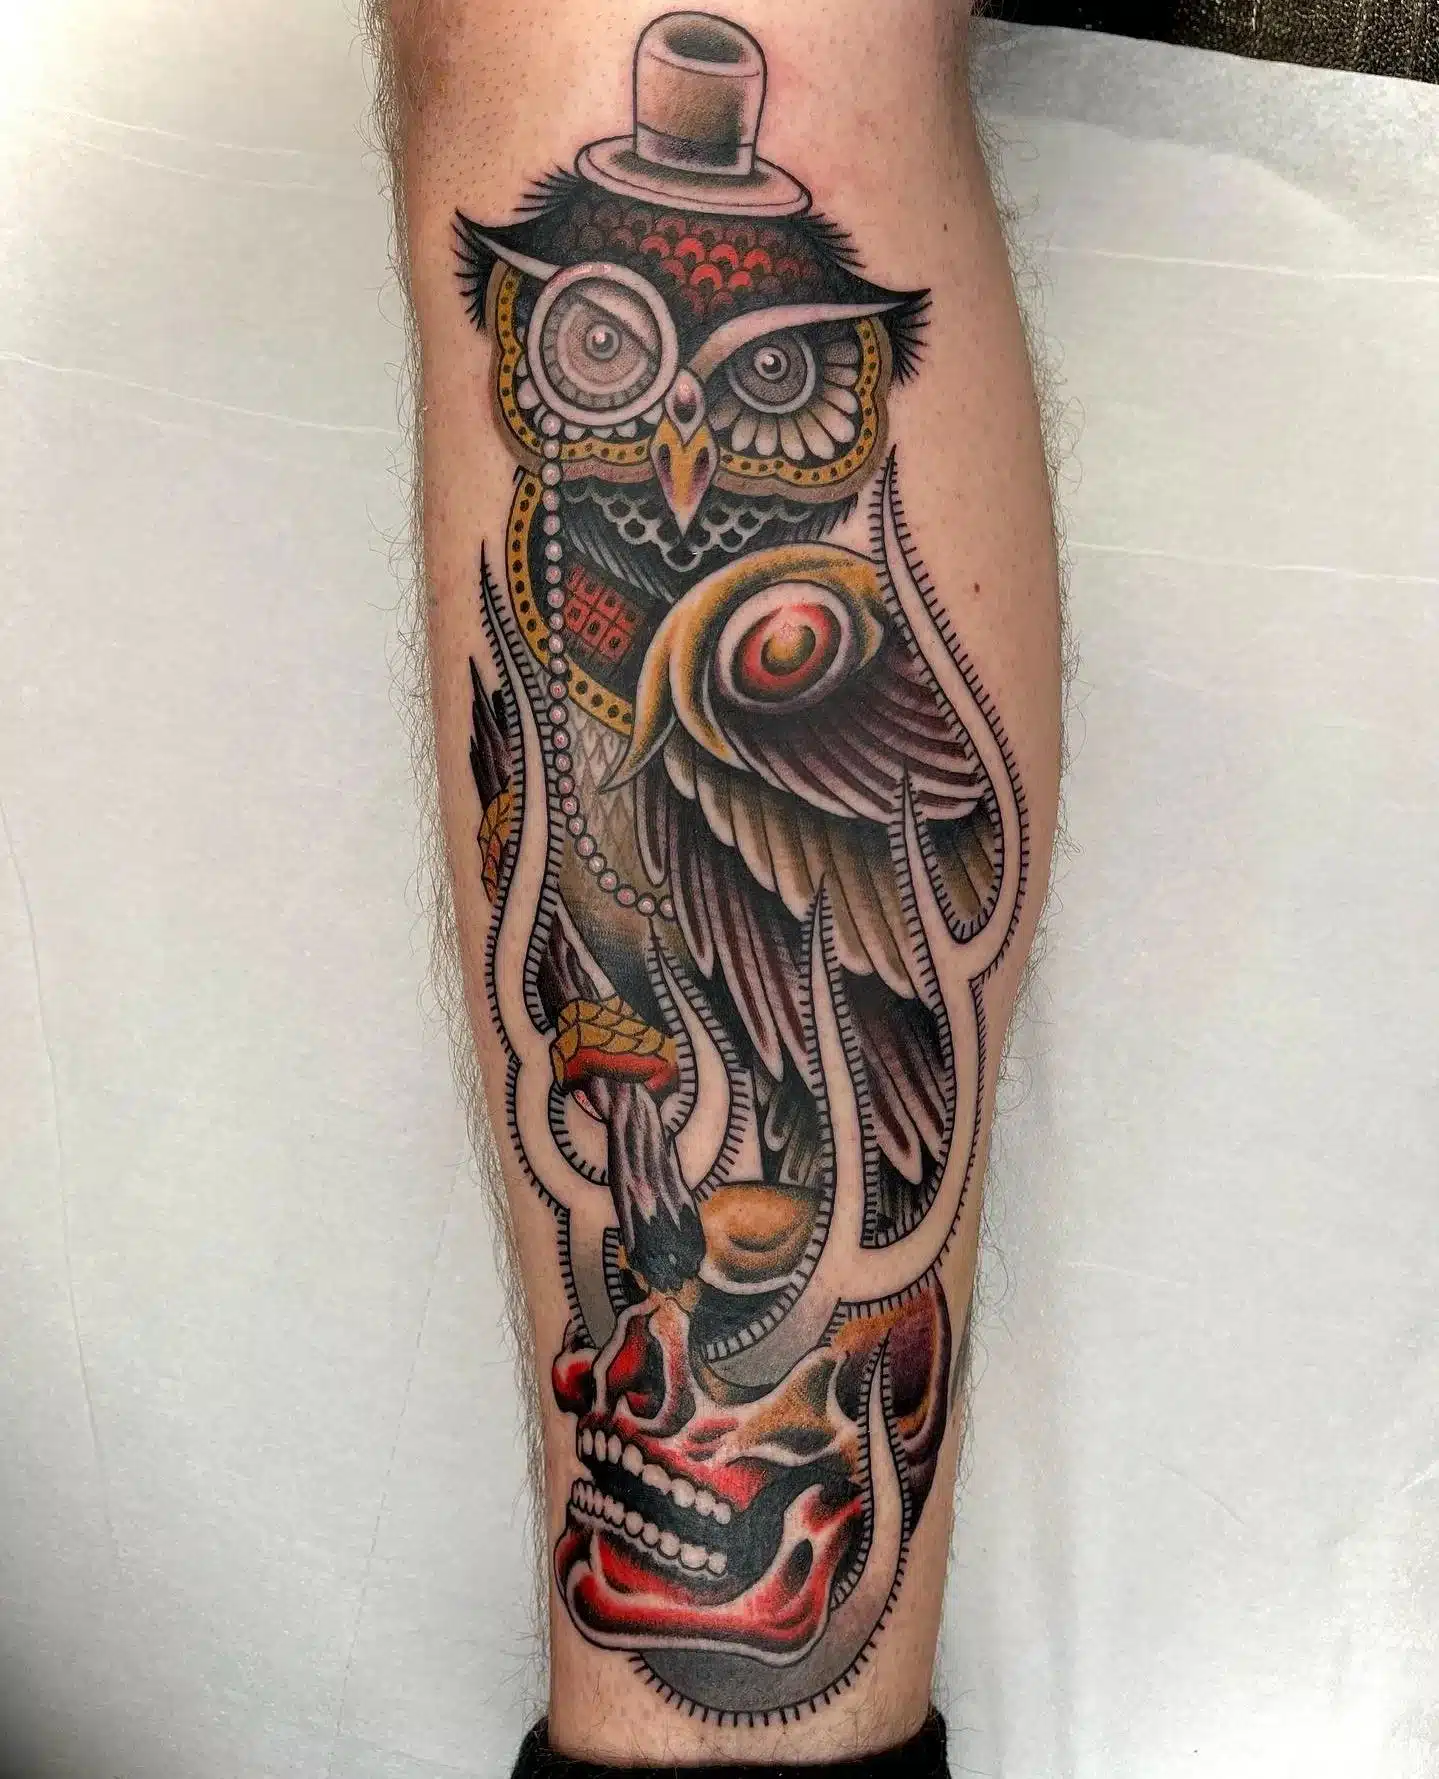 Check out this owl though!
Classy work by our Latino laddie Enrique for Martin who sat through a full day like an absolute pro.
enriquevemu 

Supplies from our sponsors:
magnumtattoosupplies.uk 

Using a choice of Enriques arsenal of machines:
martin.pintos.pintos 
dankubin 
vladbladirons 
And:
unigloves 
blackclaw 
thesolidink 
radiantcolorsink 

                 totaltattoo      